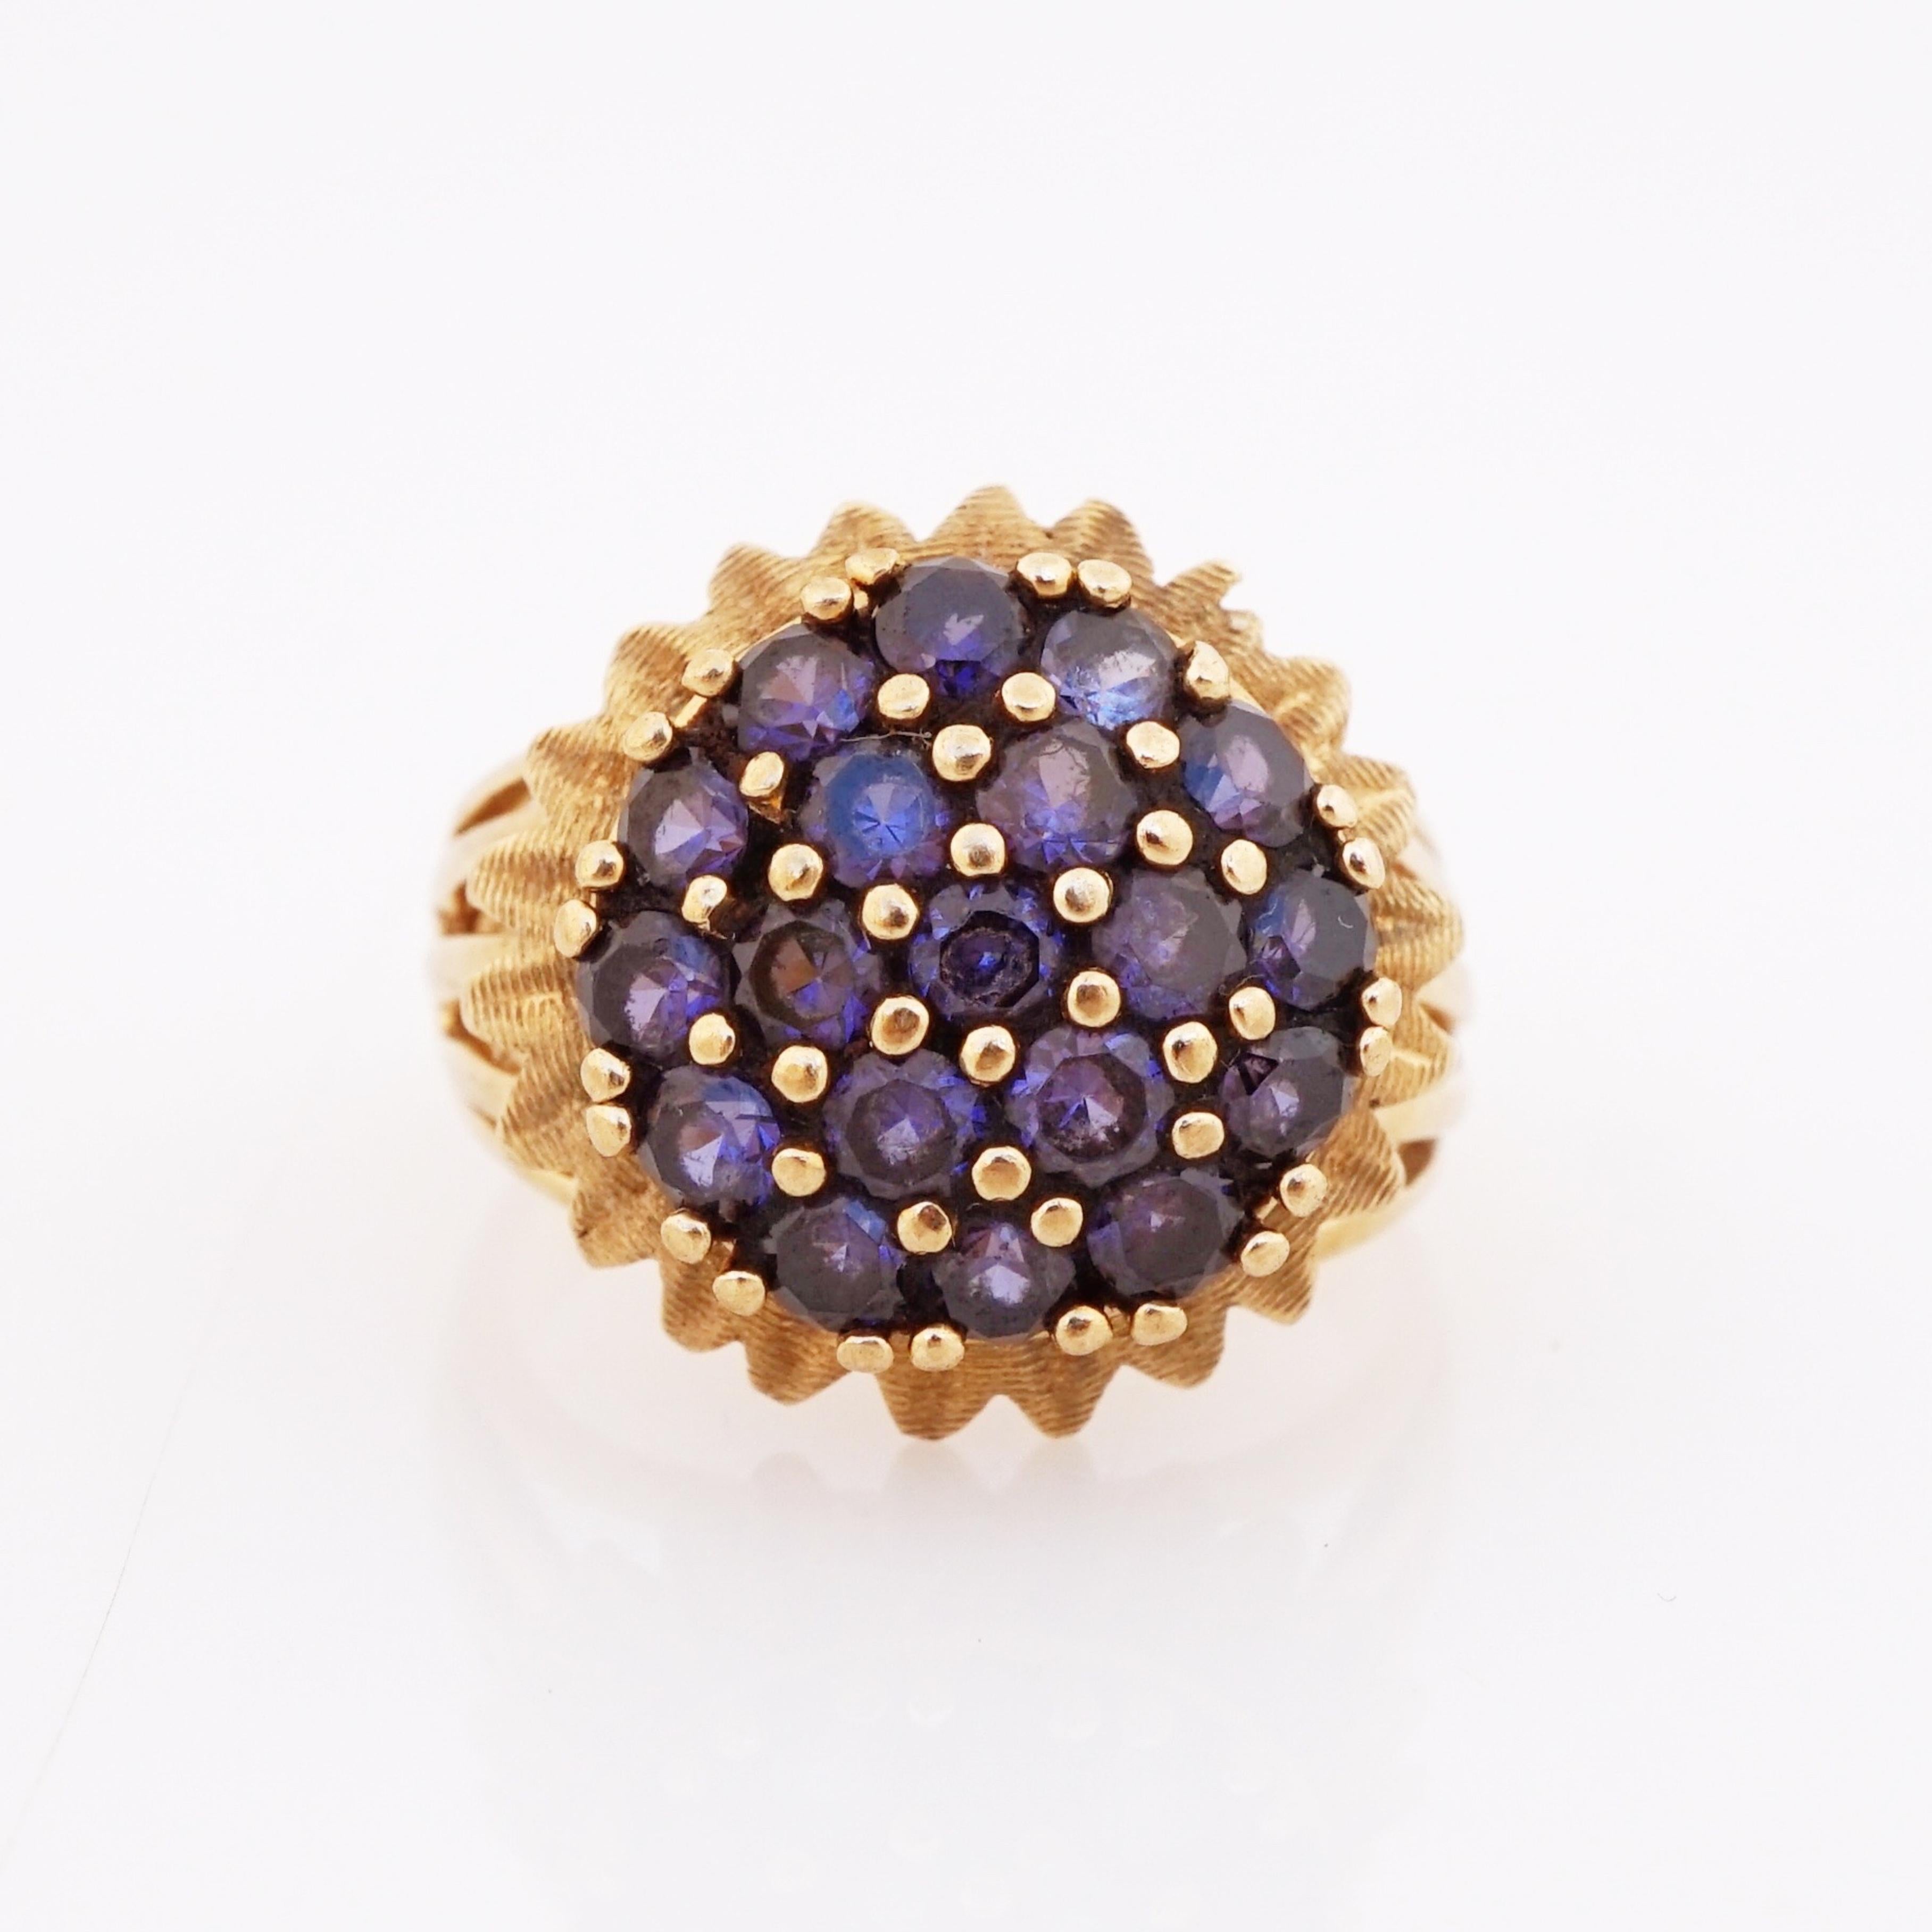 - Vintage item

- Collectible costume jewelry piece from the '70s

- Ring size 7 (US)

- Focal area measures .75